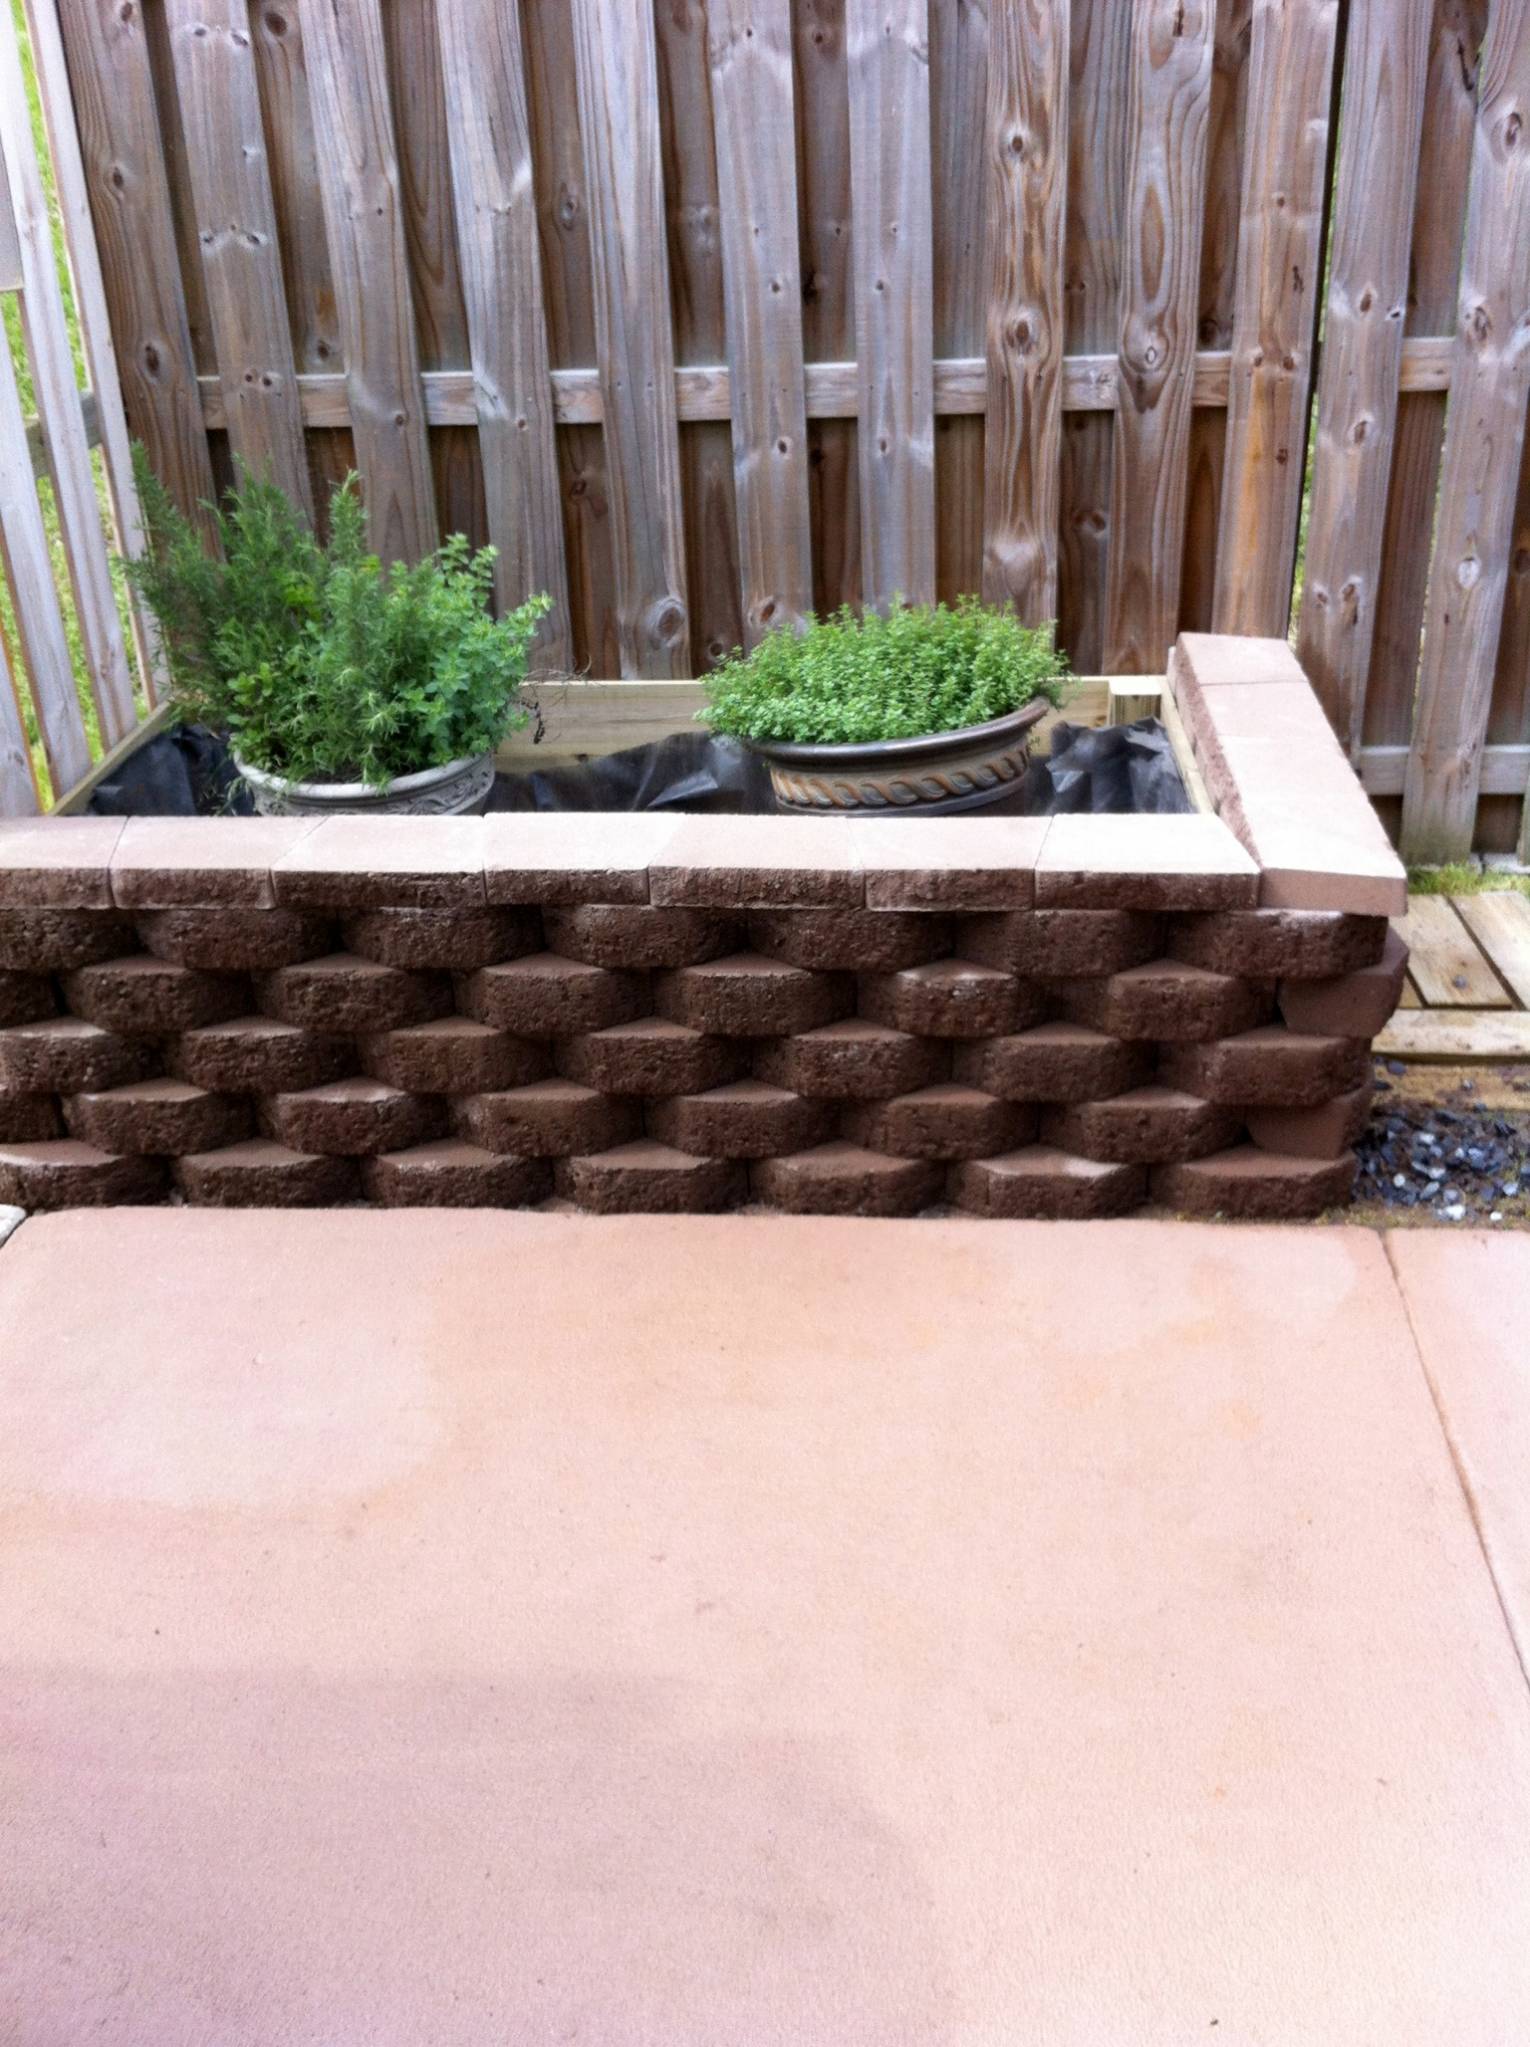 Planter box with stone face finished